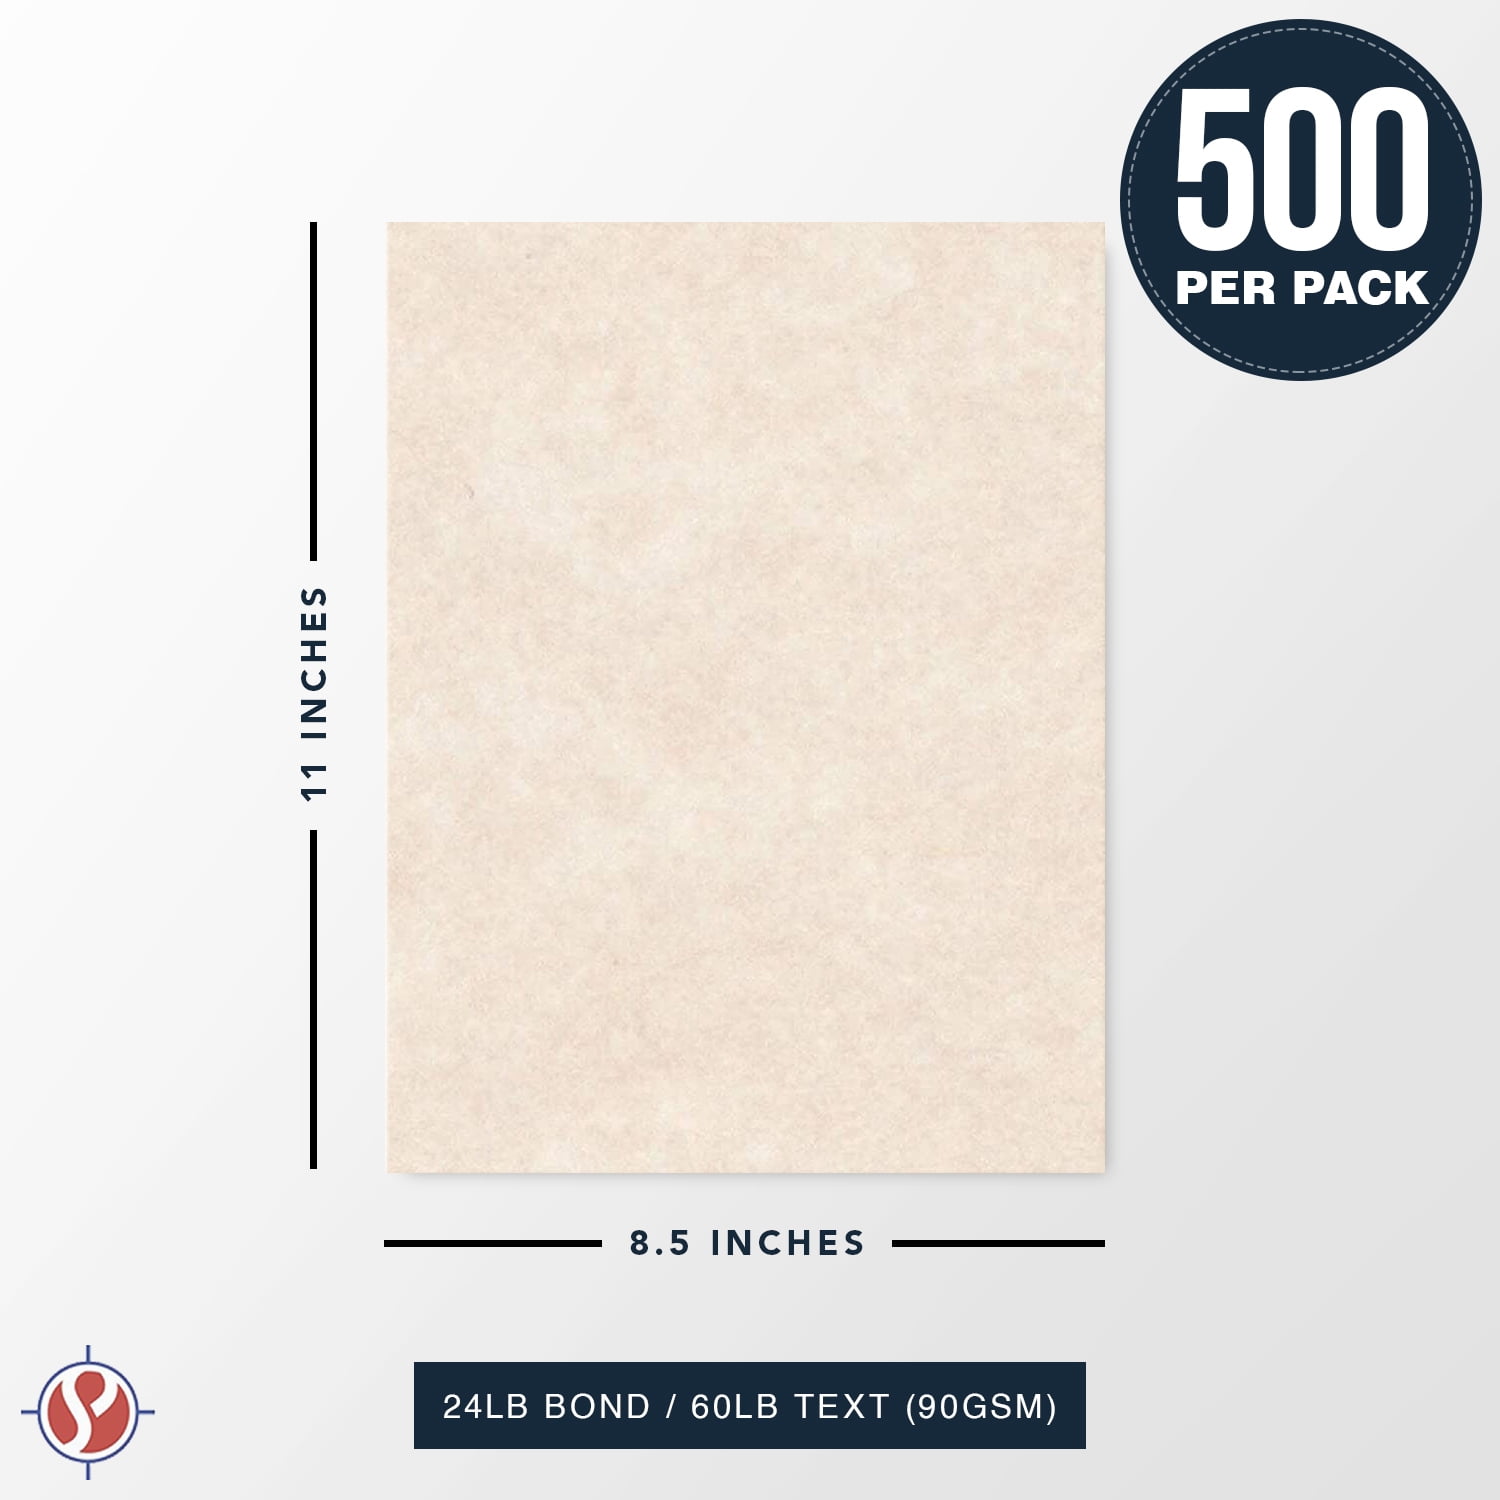 Relic Gold Parchment Paper Great for Certificates, Menus and Wedding Invitations | 24lb Bond / 60lb Text / 90gsm | 11 inch x 17 inch (Ledger Size)